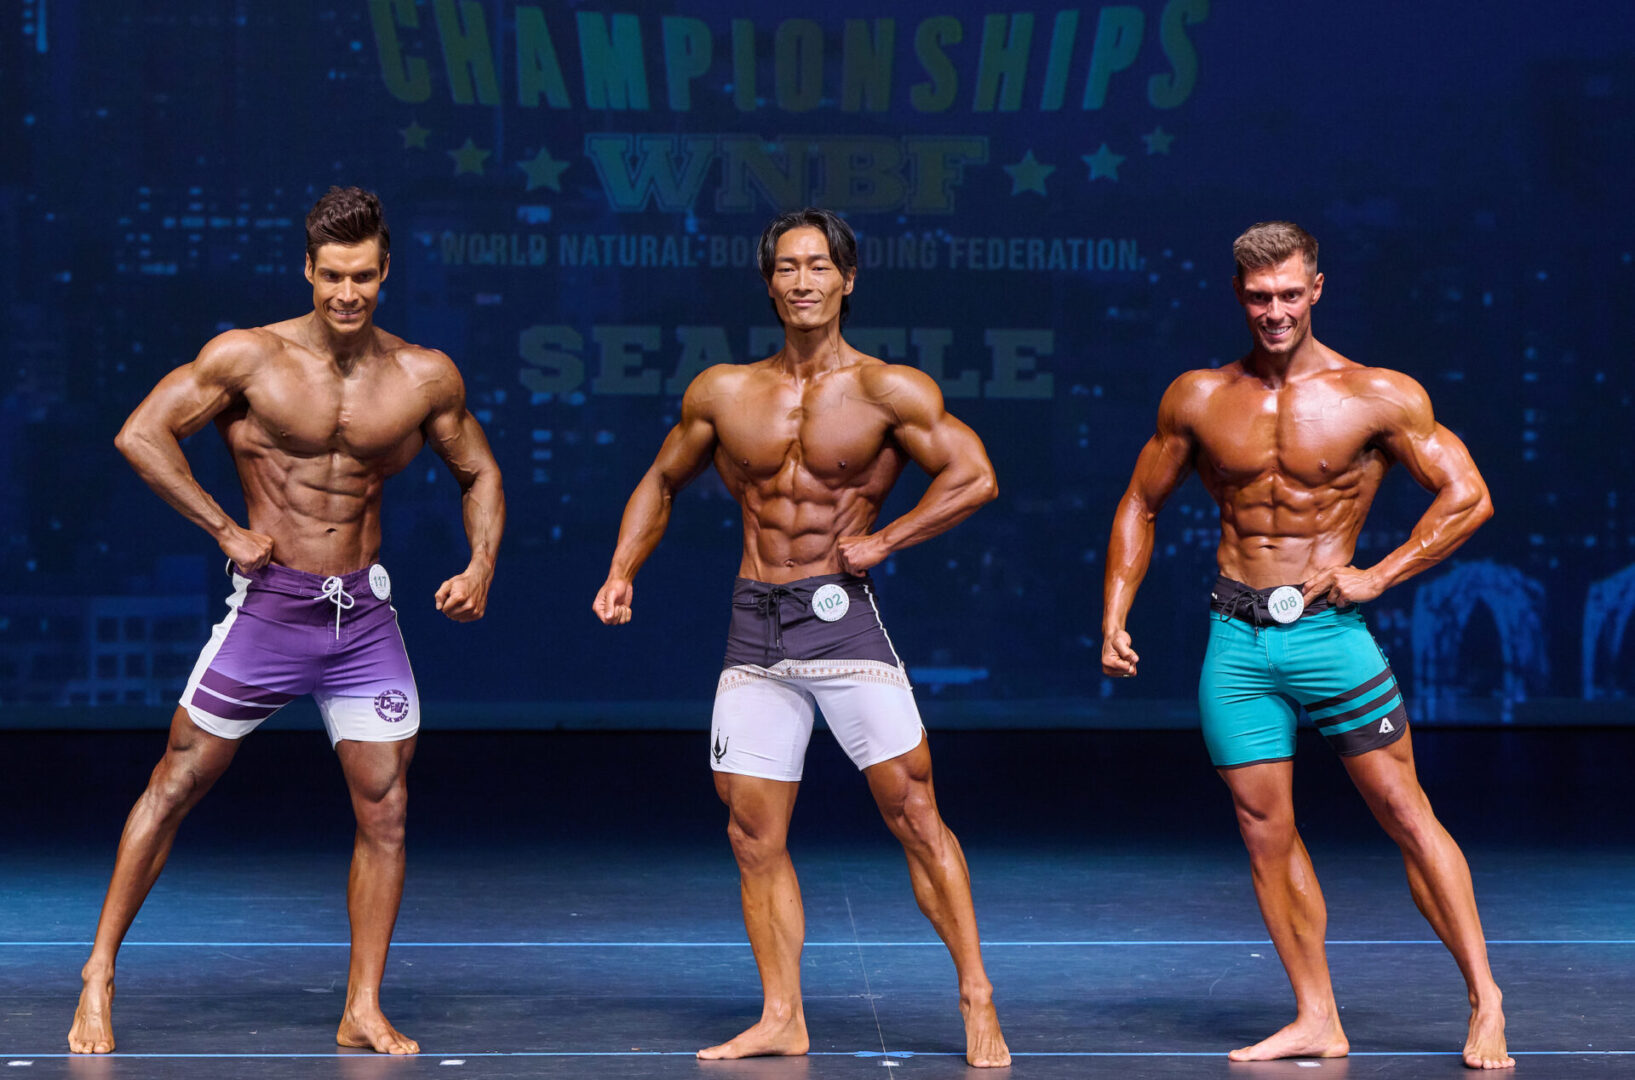 https://worldnaturalbb.com/wp-content/uploads/2023/12/2023-WNBF-Pro-Worlds-Mens-Physique-Overall-Seattle-scaled.jpg